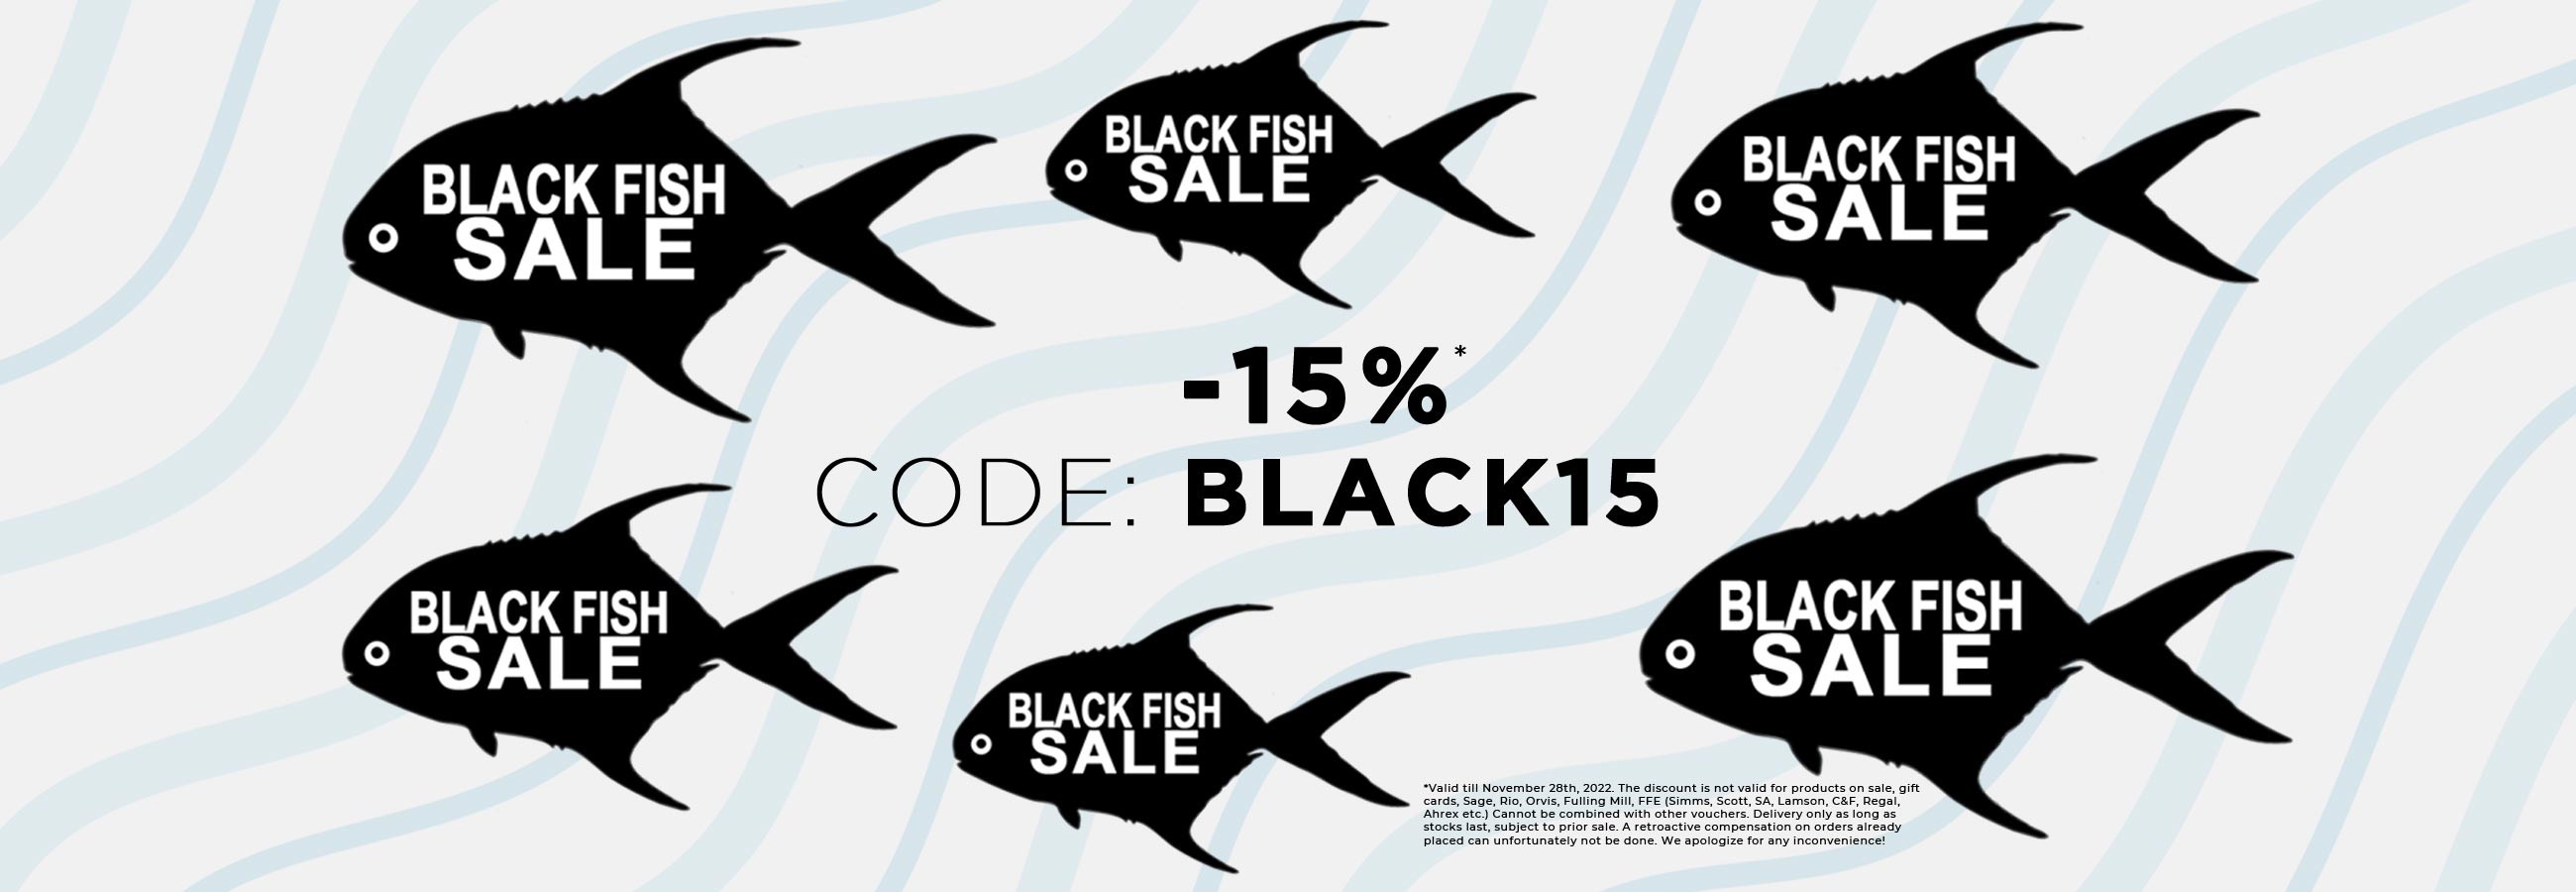 BLACK FISH SALE! Code: BLACK15  SAVE -15% on your purchase* Fly Fishing, Fly Tying, Spin Fishing